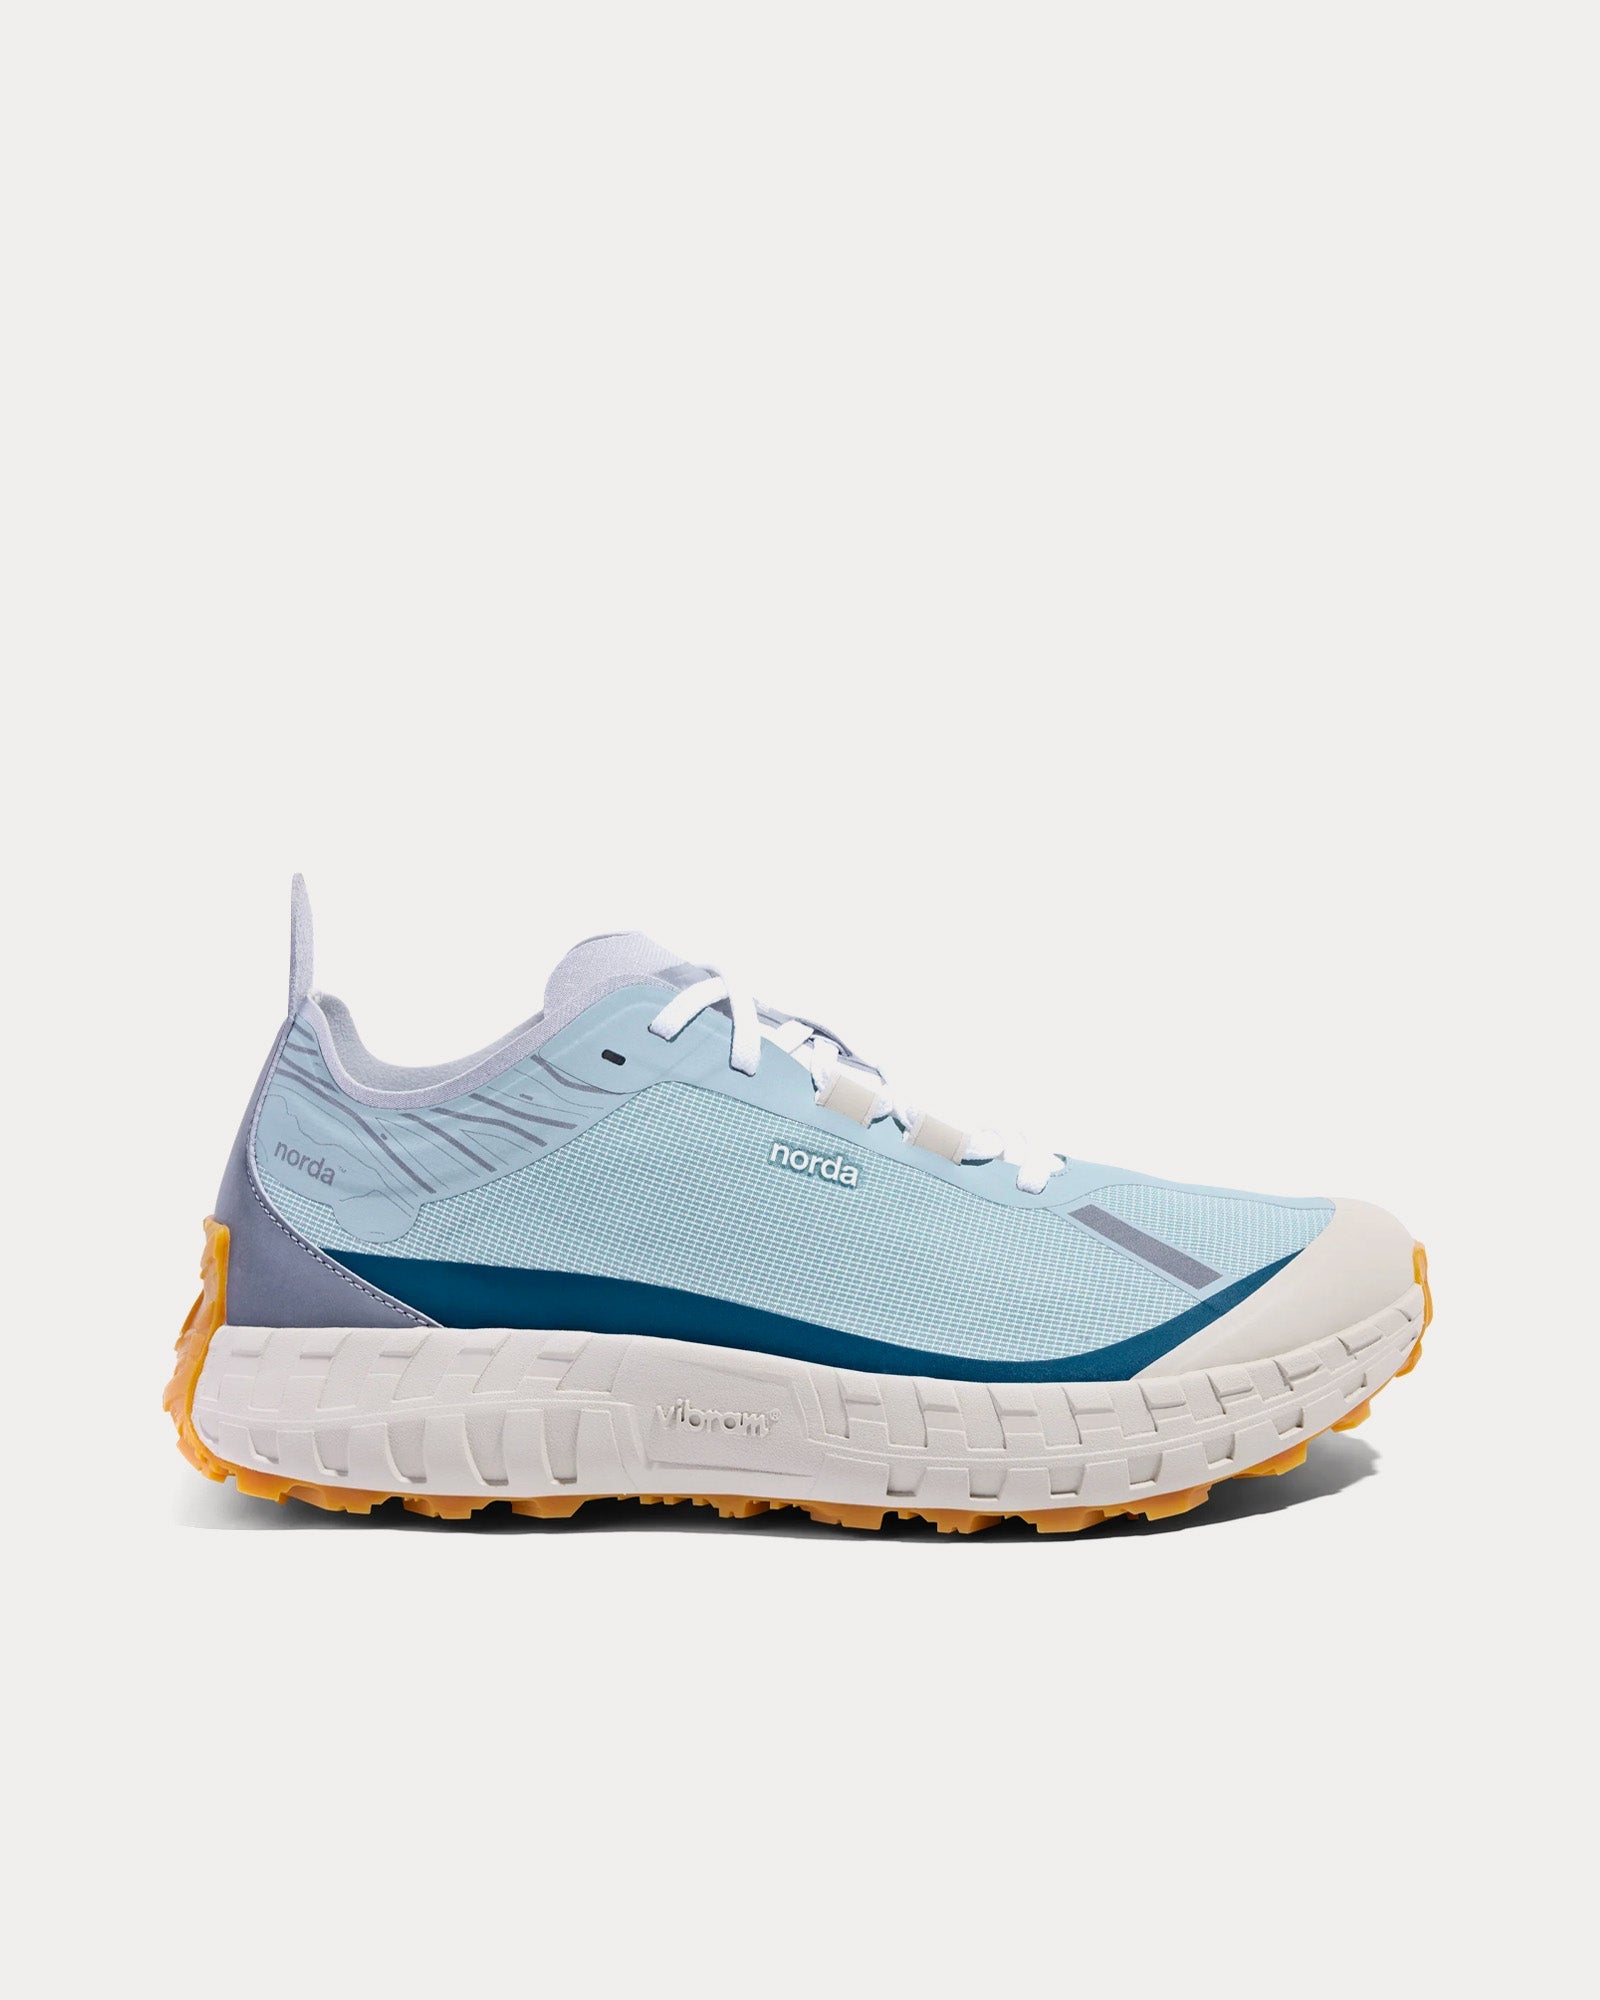 Norda - 001 M Ether Running Shoes